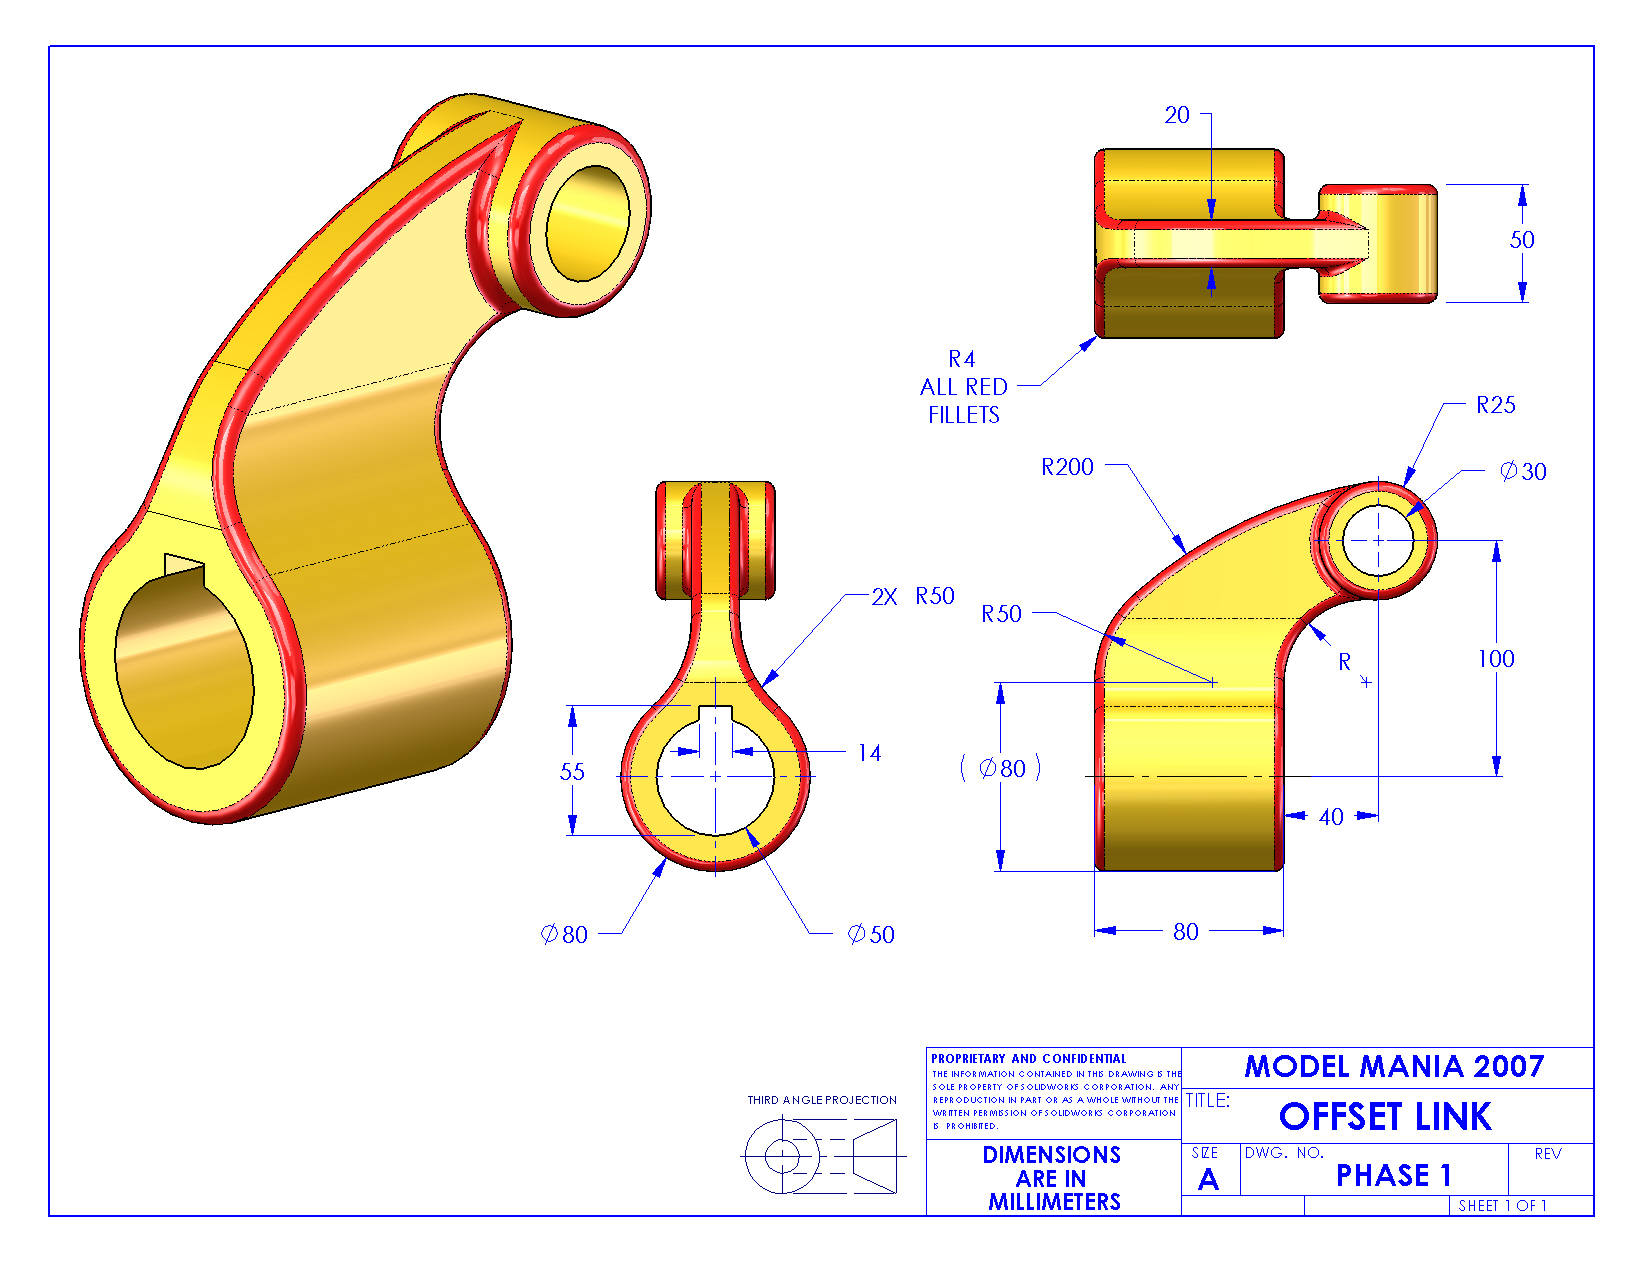 solidworks: drawings download